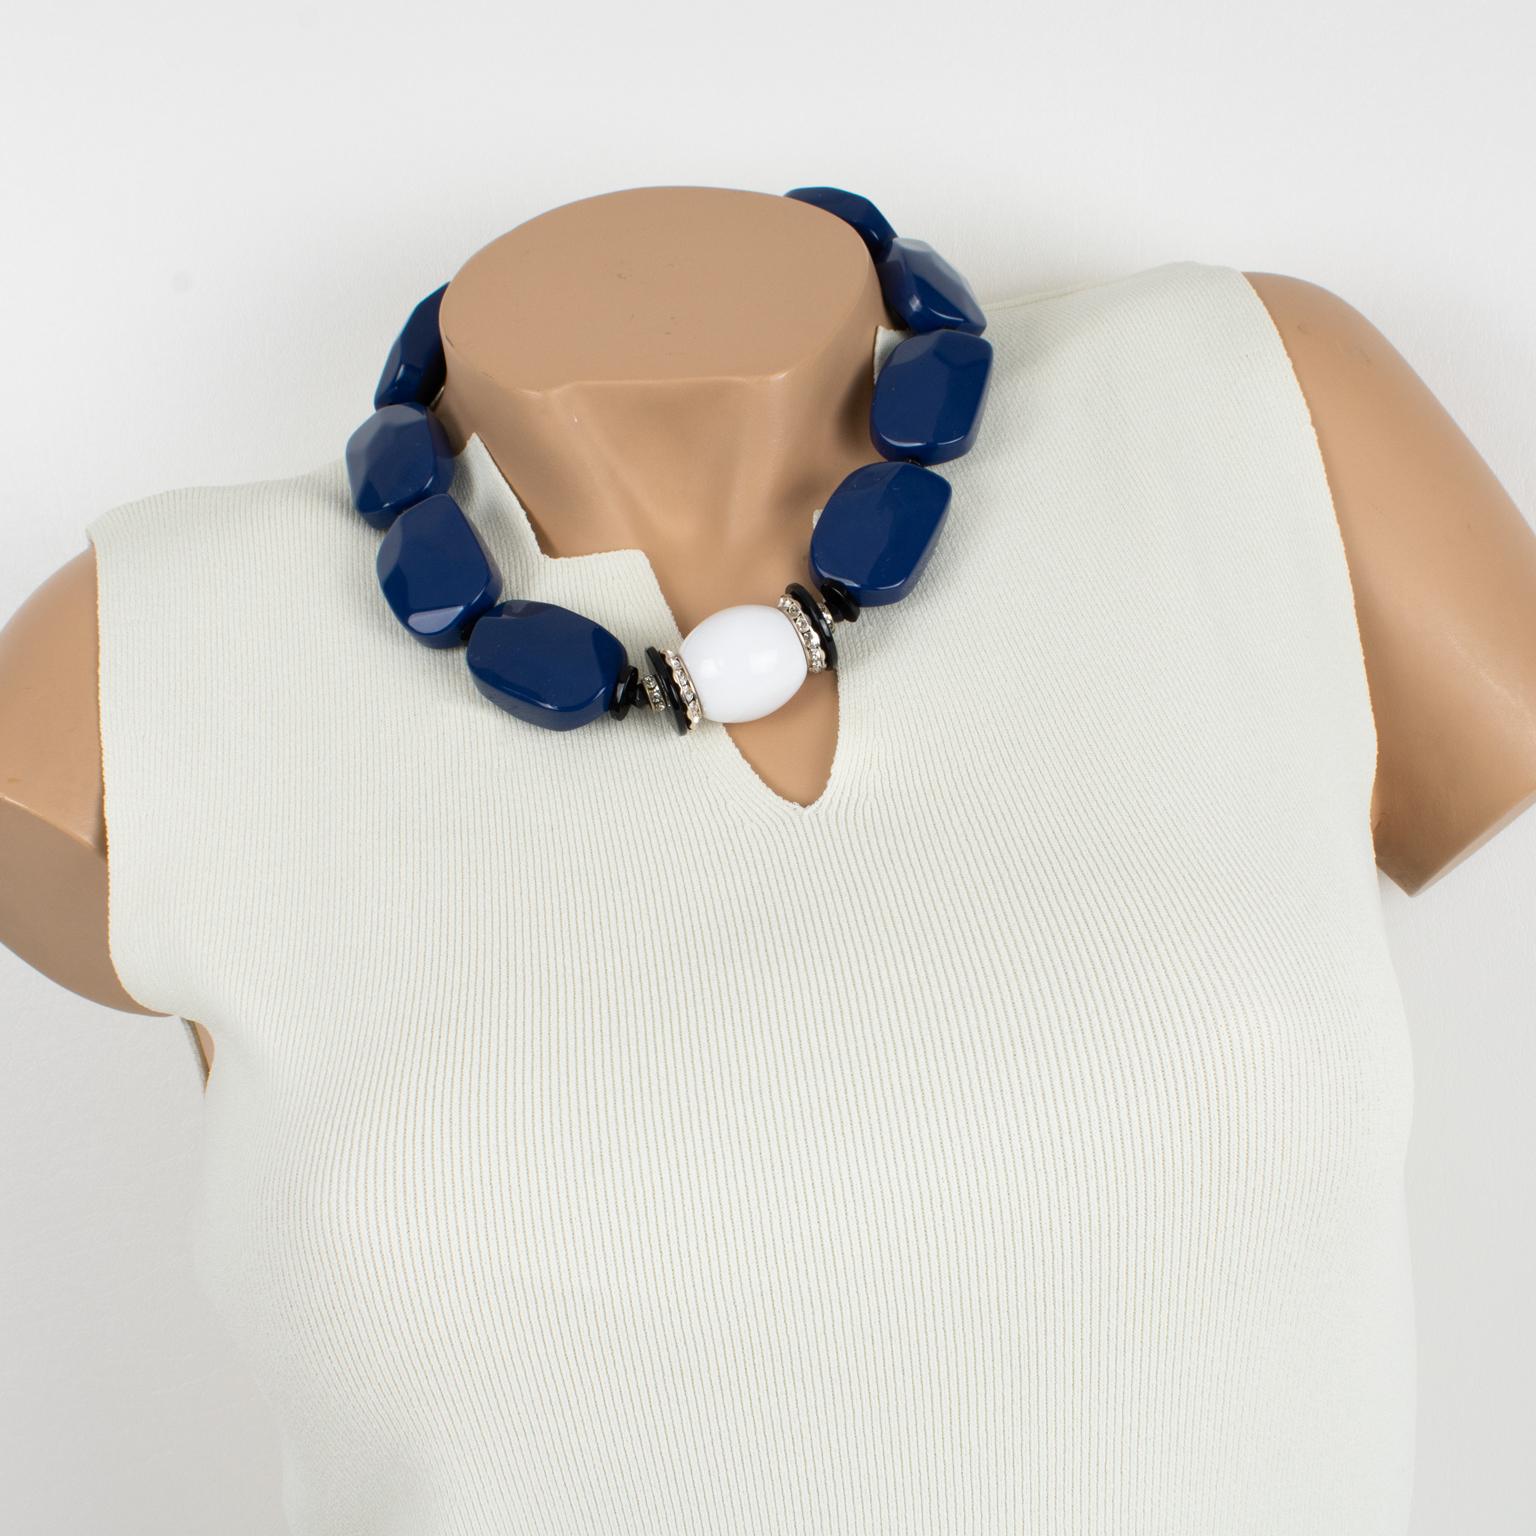 Elegant Angela Caputi, made in Italy resin choker necklace. 
This necklace features chunky carved pebble beads with a central round domed bead with crystal rhinestones spacers and works on cobalt blue and white contrast. Her matching of colors is